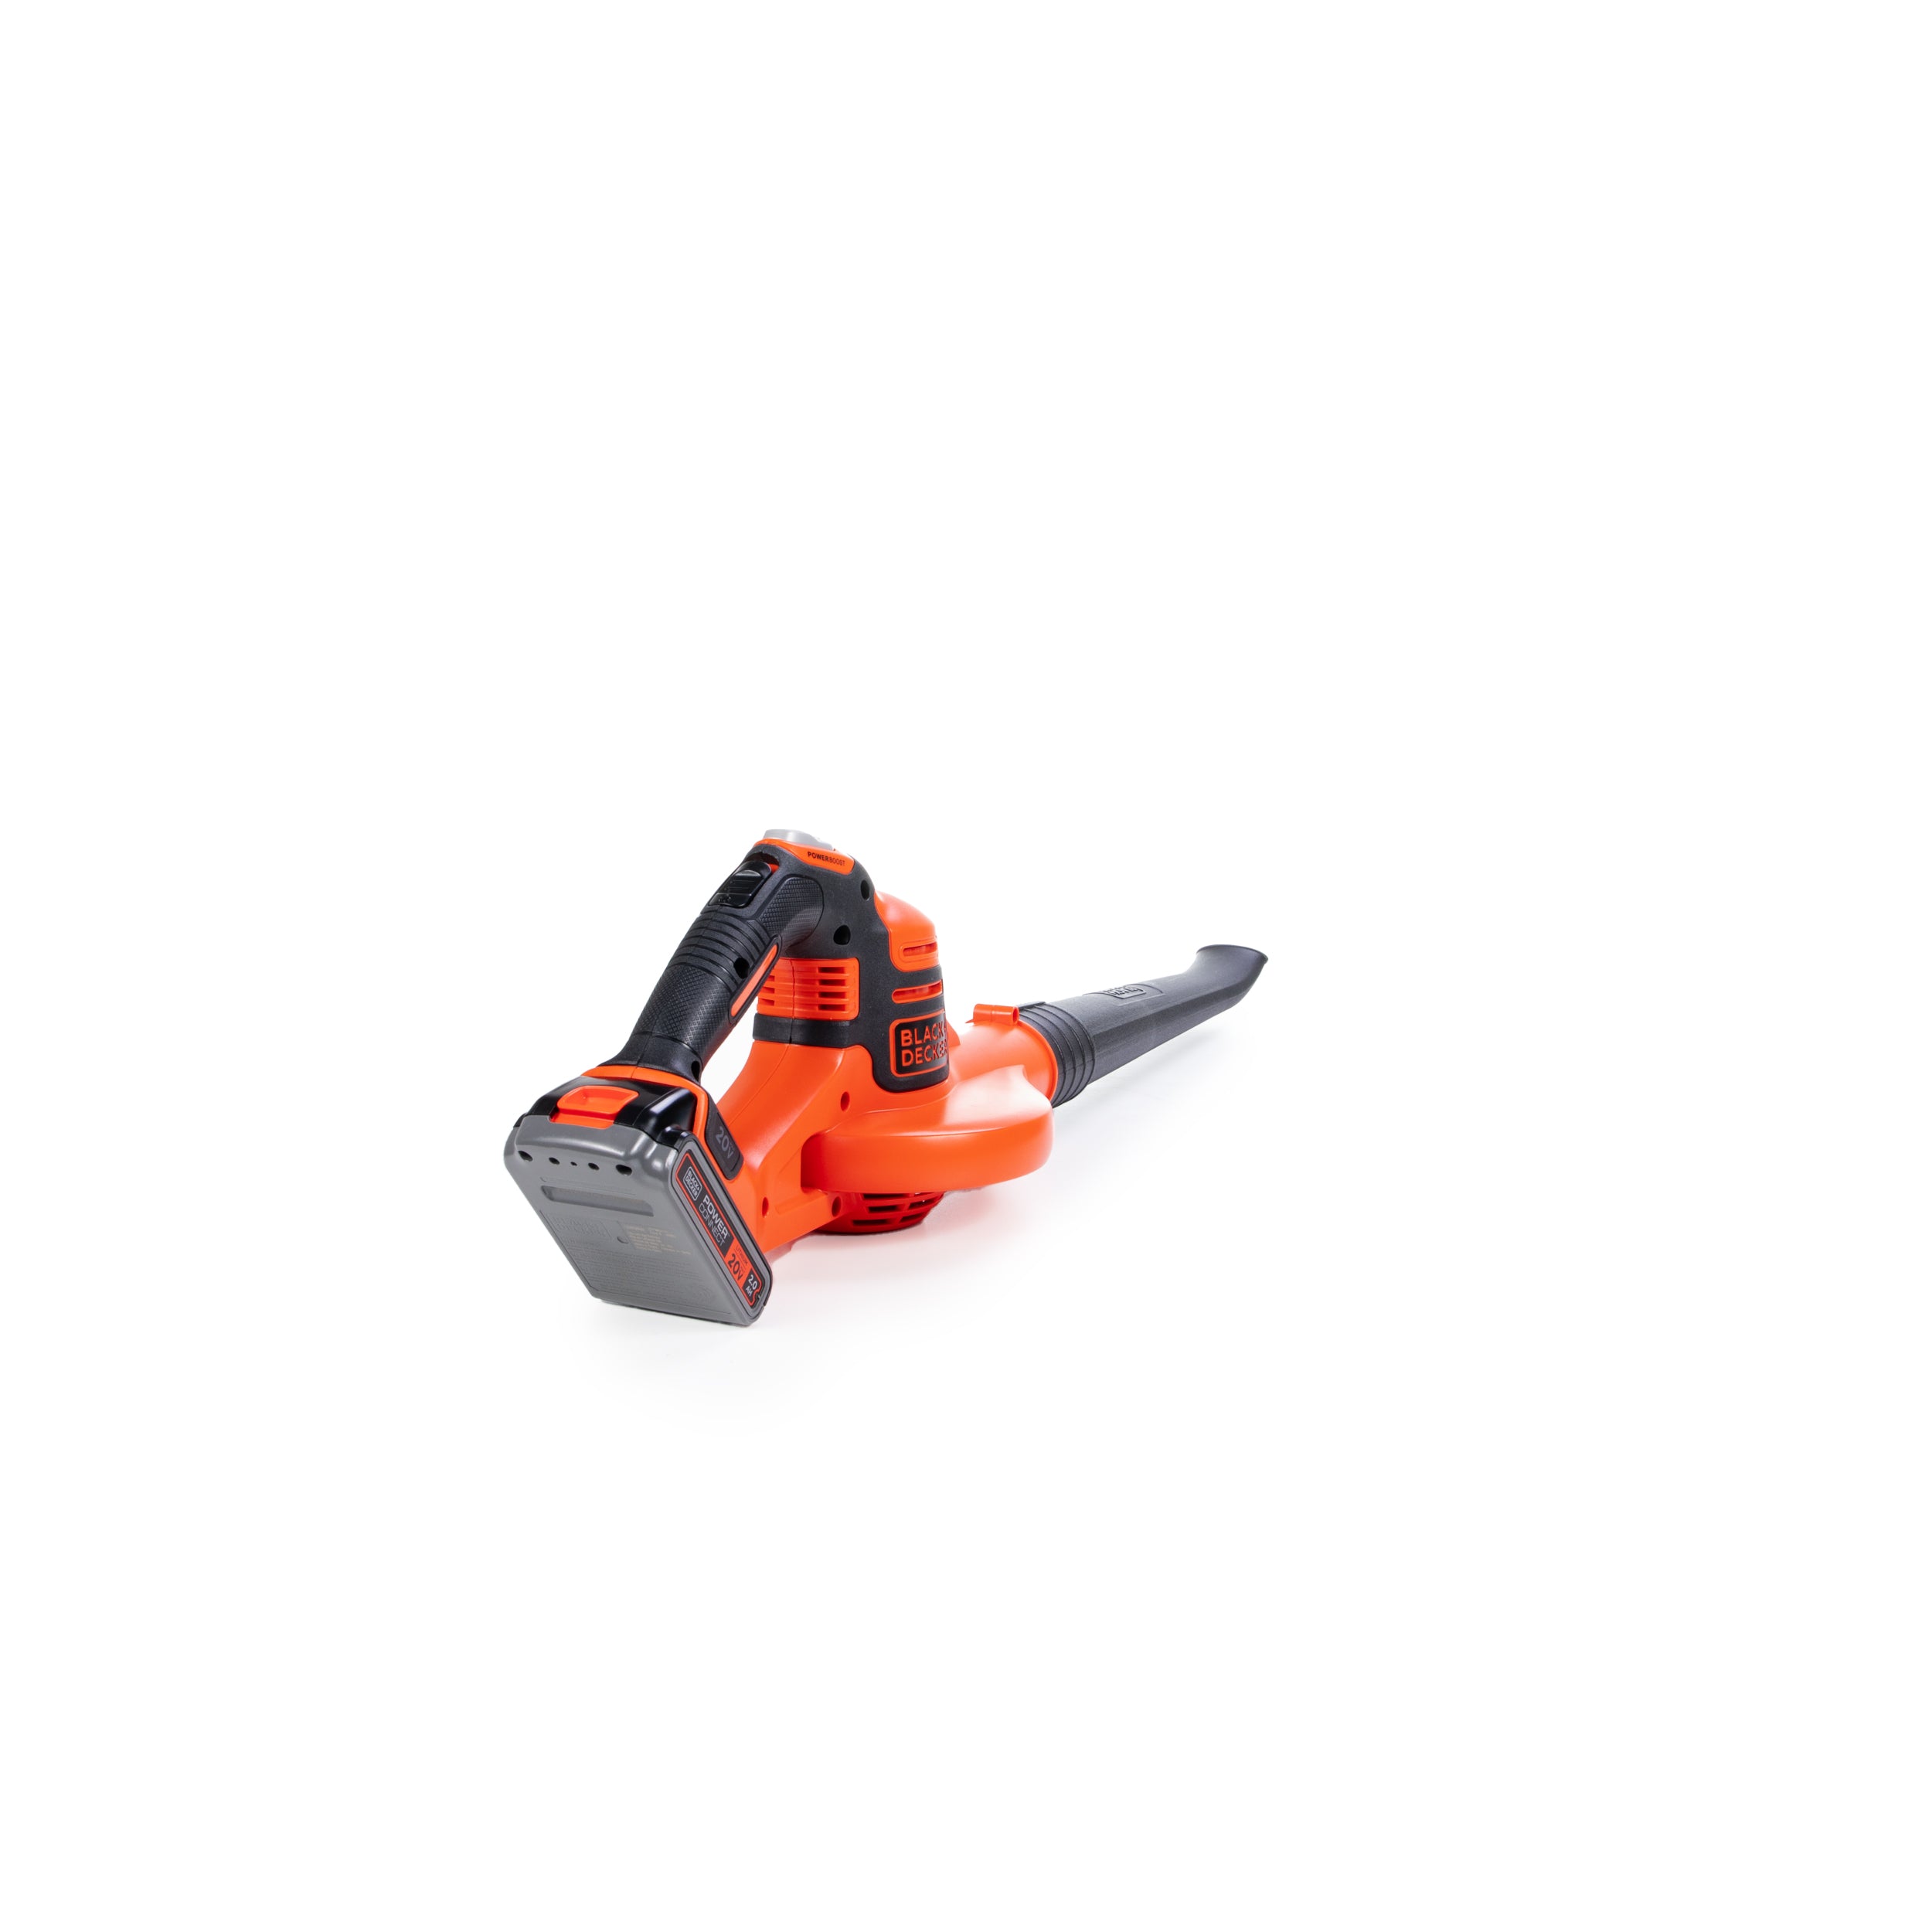 BLACK+DECKER 20V MAX Cordless Sweeper with Power Boost just $49.99 (Reg.  $119) at WOOT!